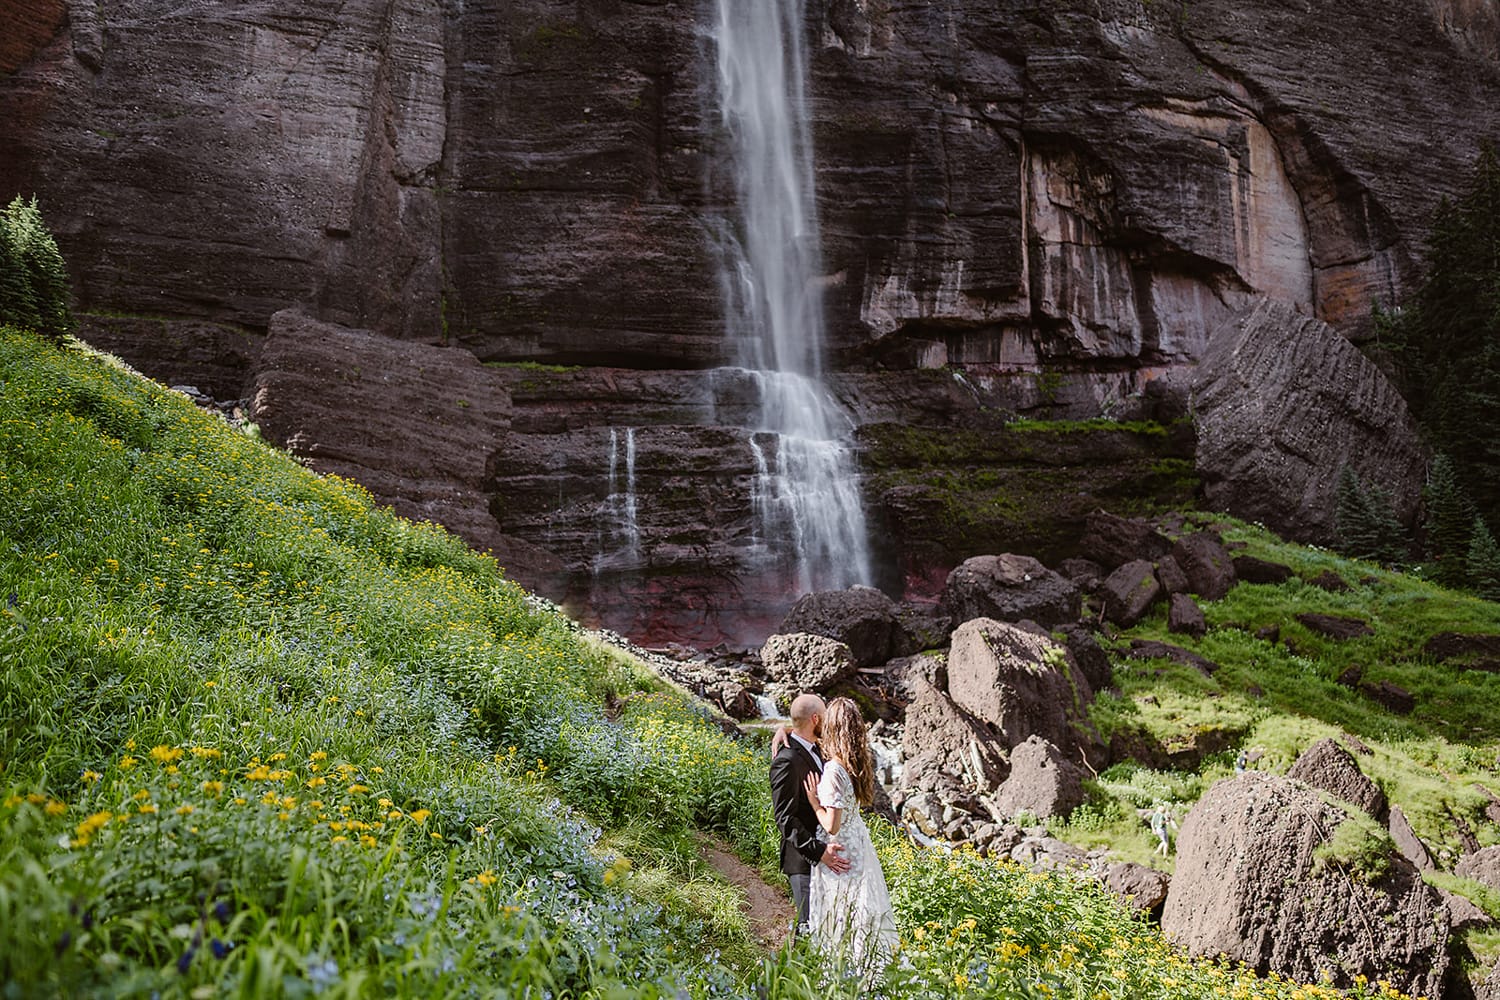 Couple standing beneath bridal veil falls in Telluride, Colorado for their elopement.